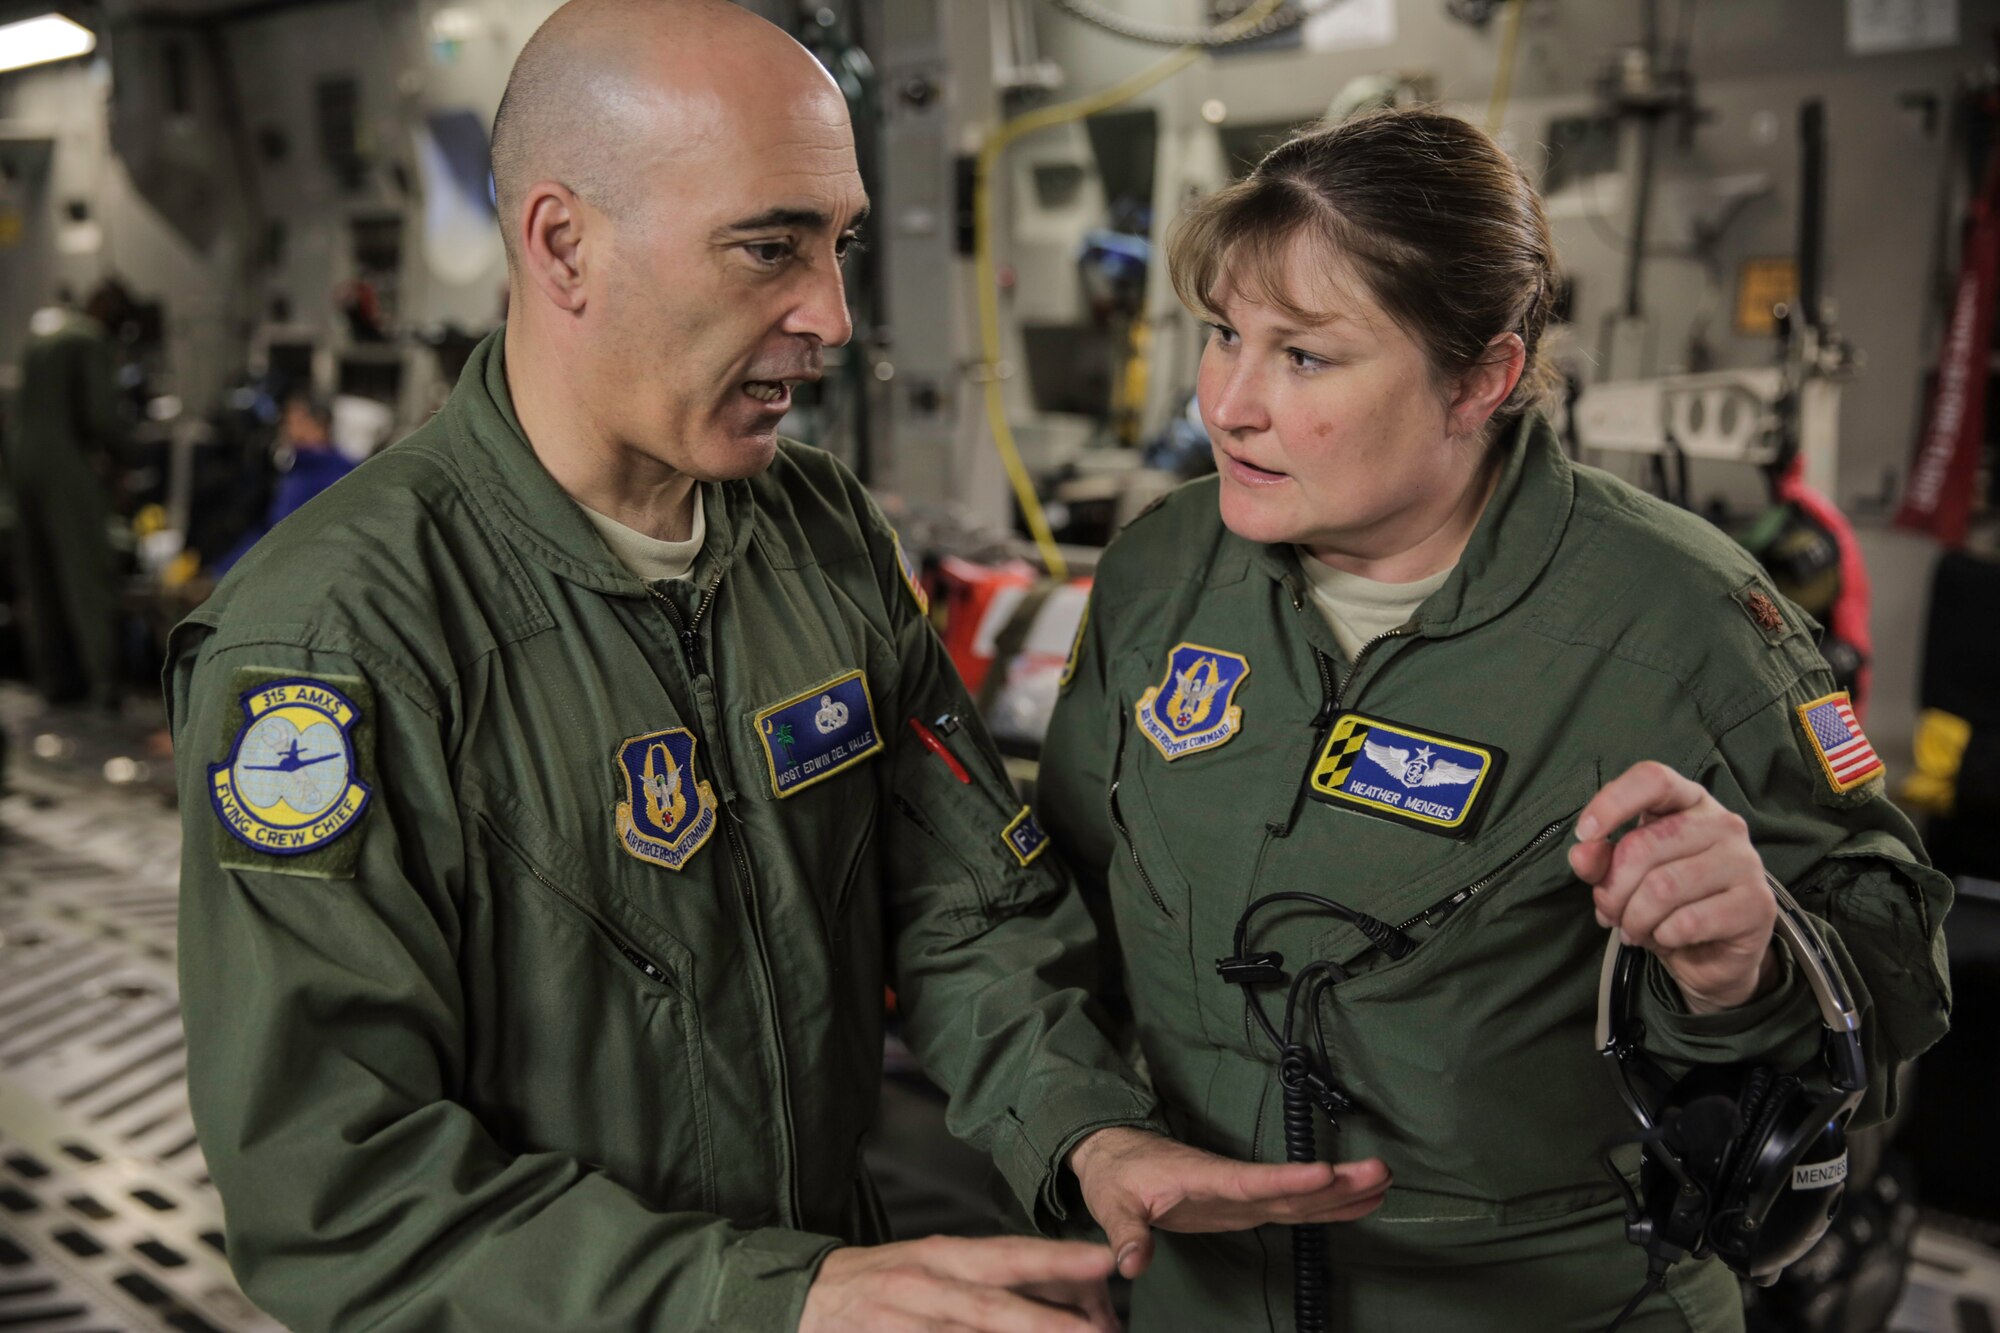 Master Sgt. Edwin Del Valle discusses the electrical system of the C-17 with Maj. Heather Menzies Feb. 22, 2015 during a training mission in San Juan, Puerto Rico. The mission was part of a three day fly-away with Airmen from the 315th Airlift Wing at Joint Base Charleston, South Carolina and aeromedical Airmen from the 459th Air Refueling Wing at Joint Base Andrews, Maryland. The training mission was a cost-effective means to accomplish currency items and evaluations for flight crew members and provided C-17 familiarization and proficiency training for aeromedical Airmen. Del Valle is a flying crew chief with the 315th Aircraft Maintenance Squadron and Menzies is a Stan/Eval flight nurse with the 459th Operations Group (U.S. Air Force Photo/Tech. Sgt. Shane Ellis)
